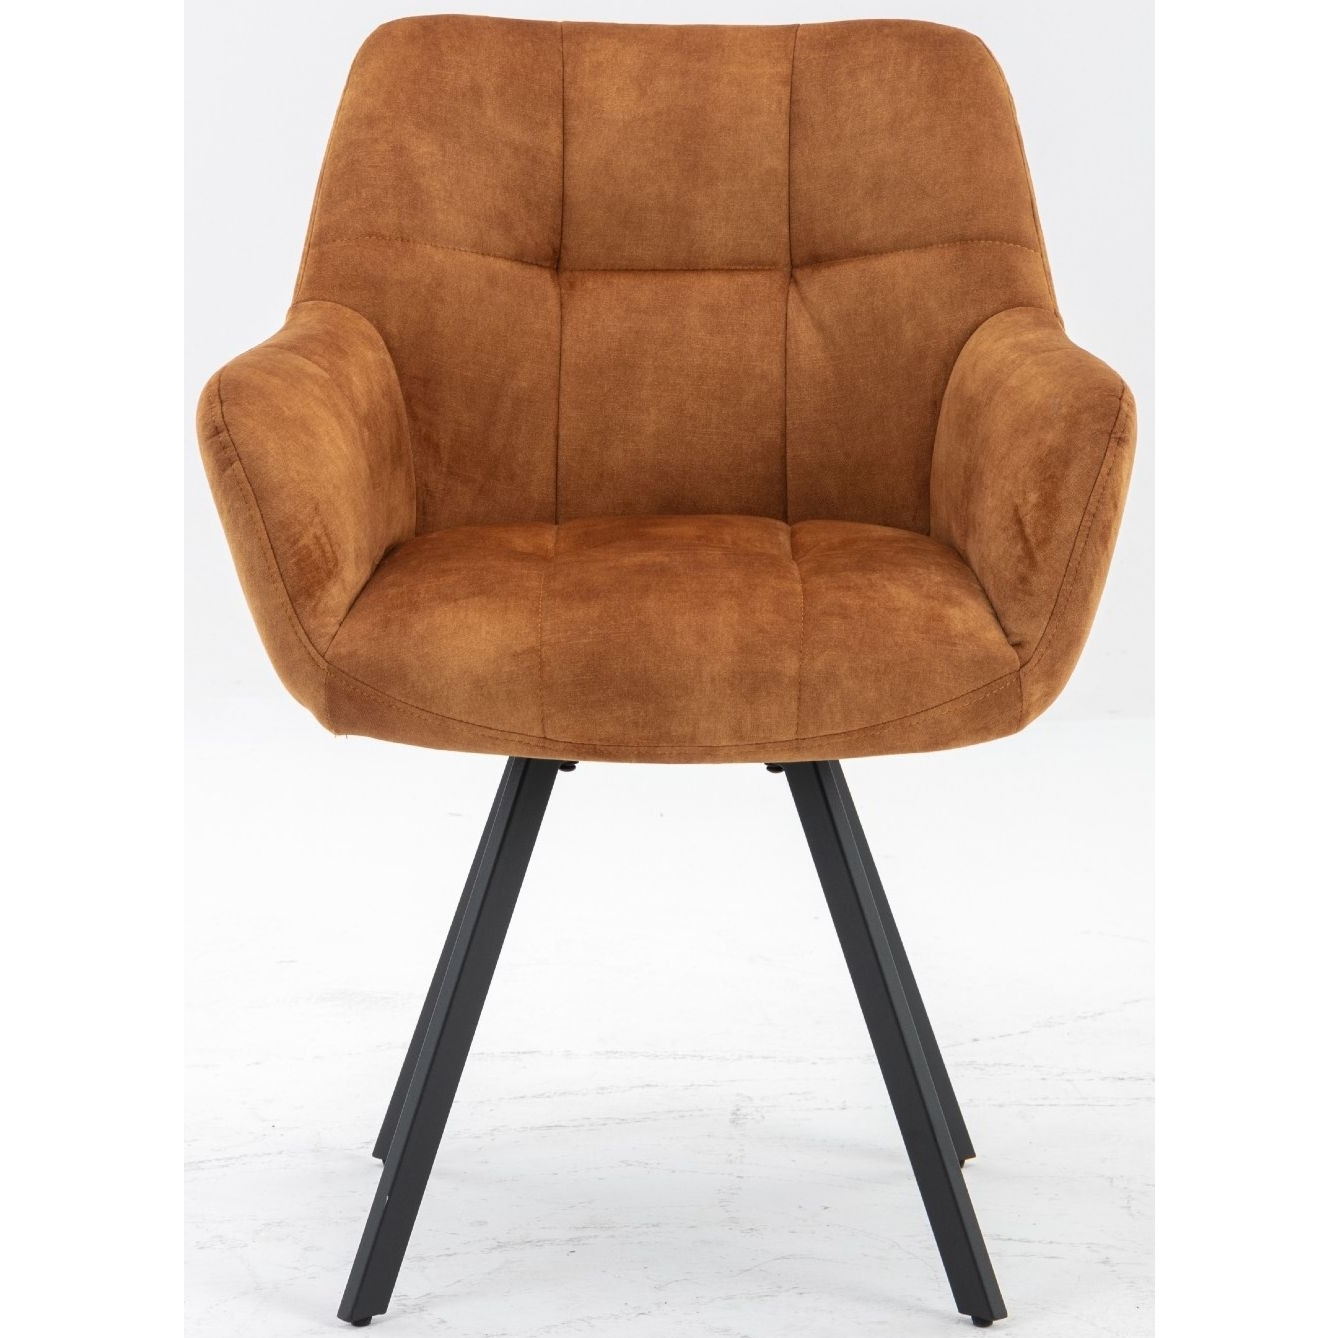 Jade Rust Dining Armchair, Velvet Fabric Upholstered (Sold in Pairs) - image 1